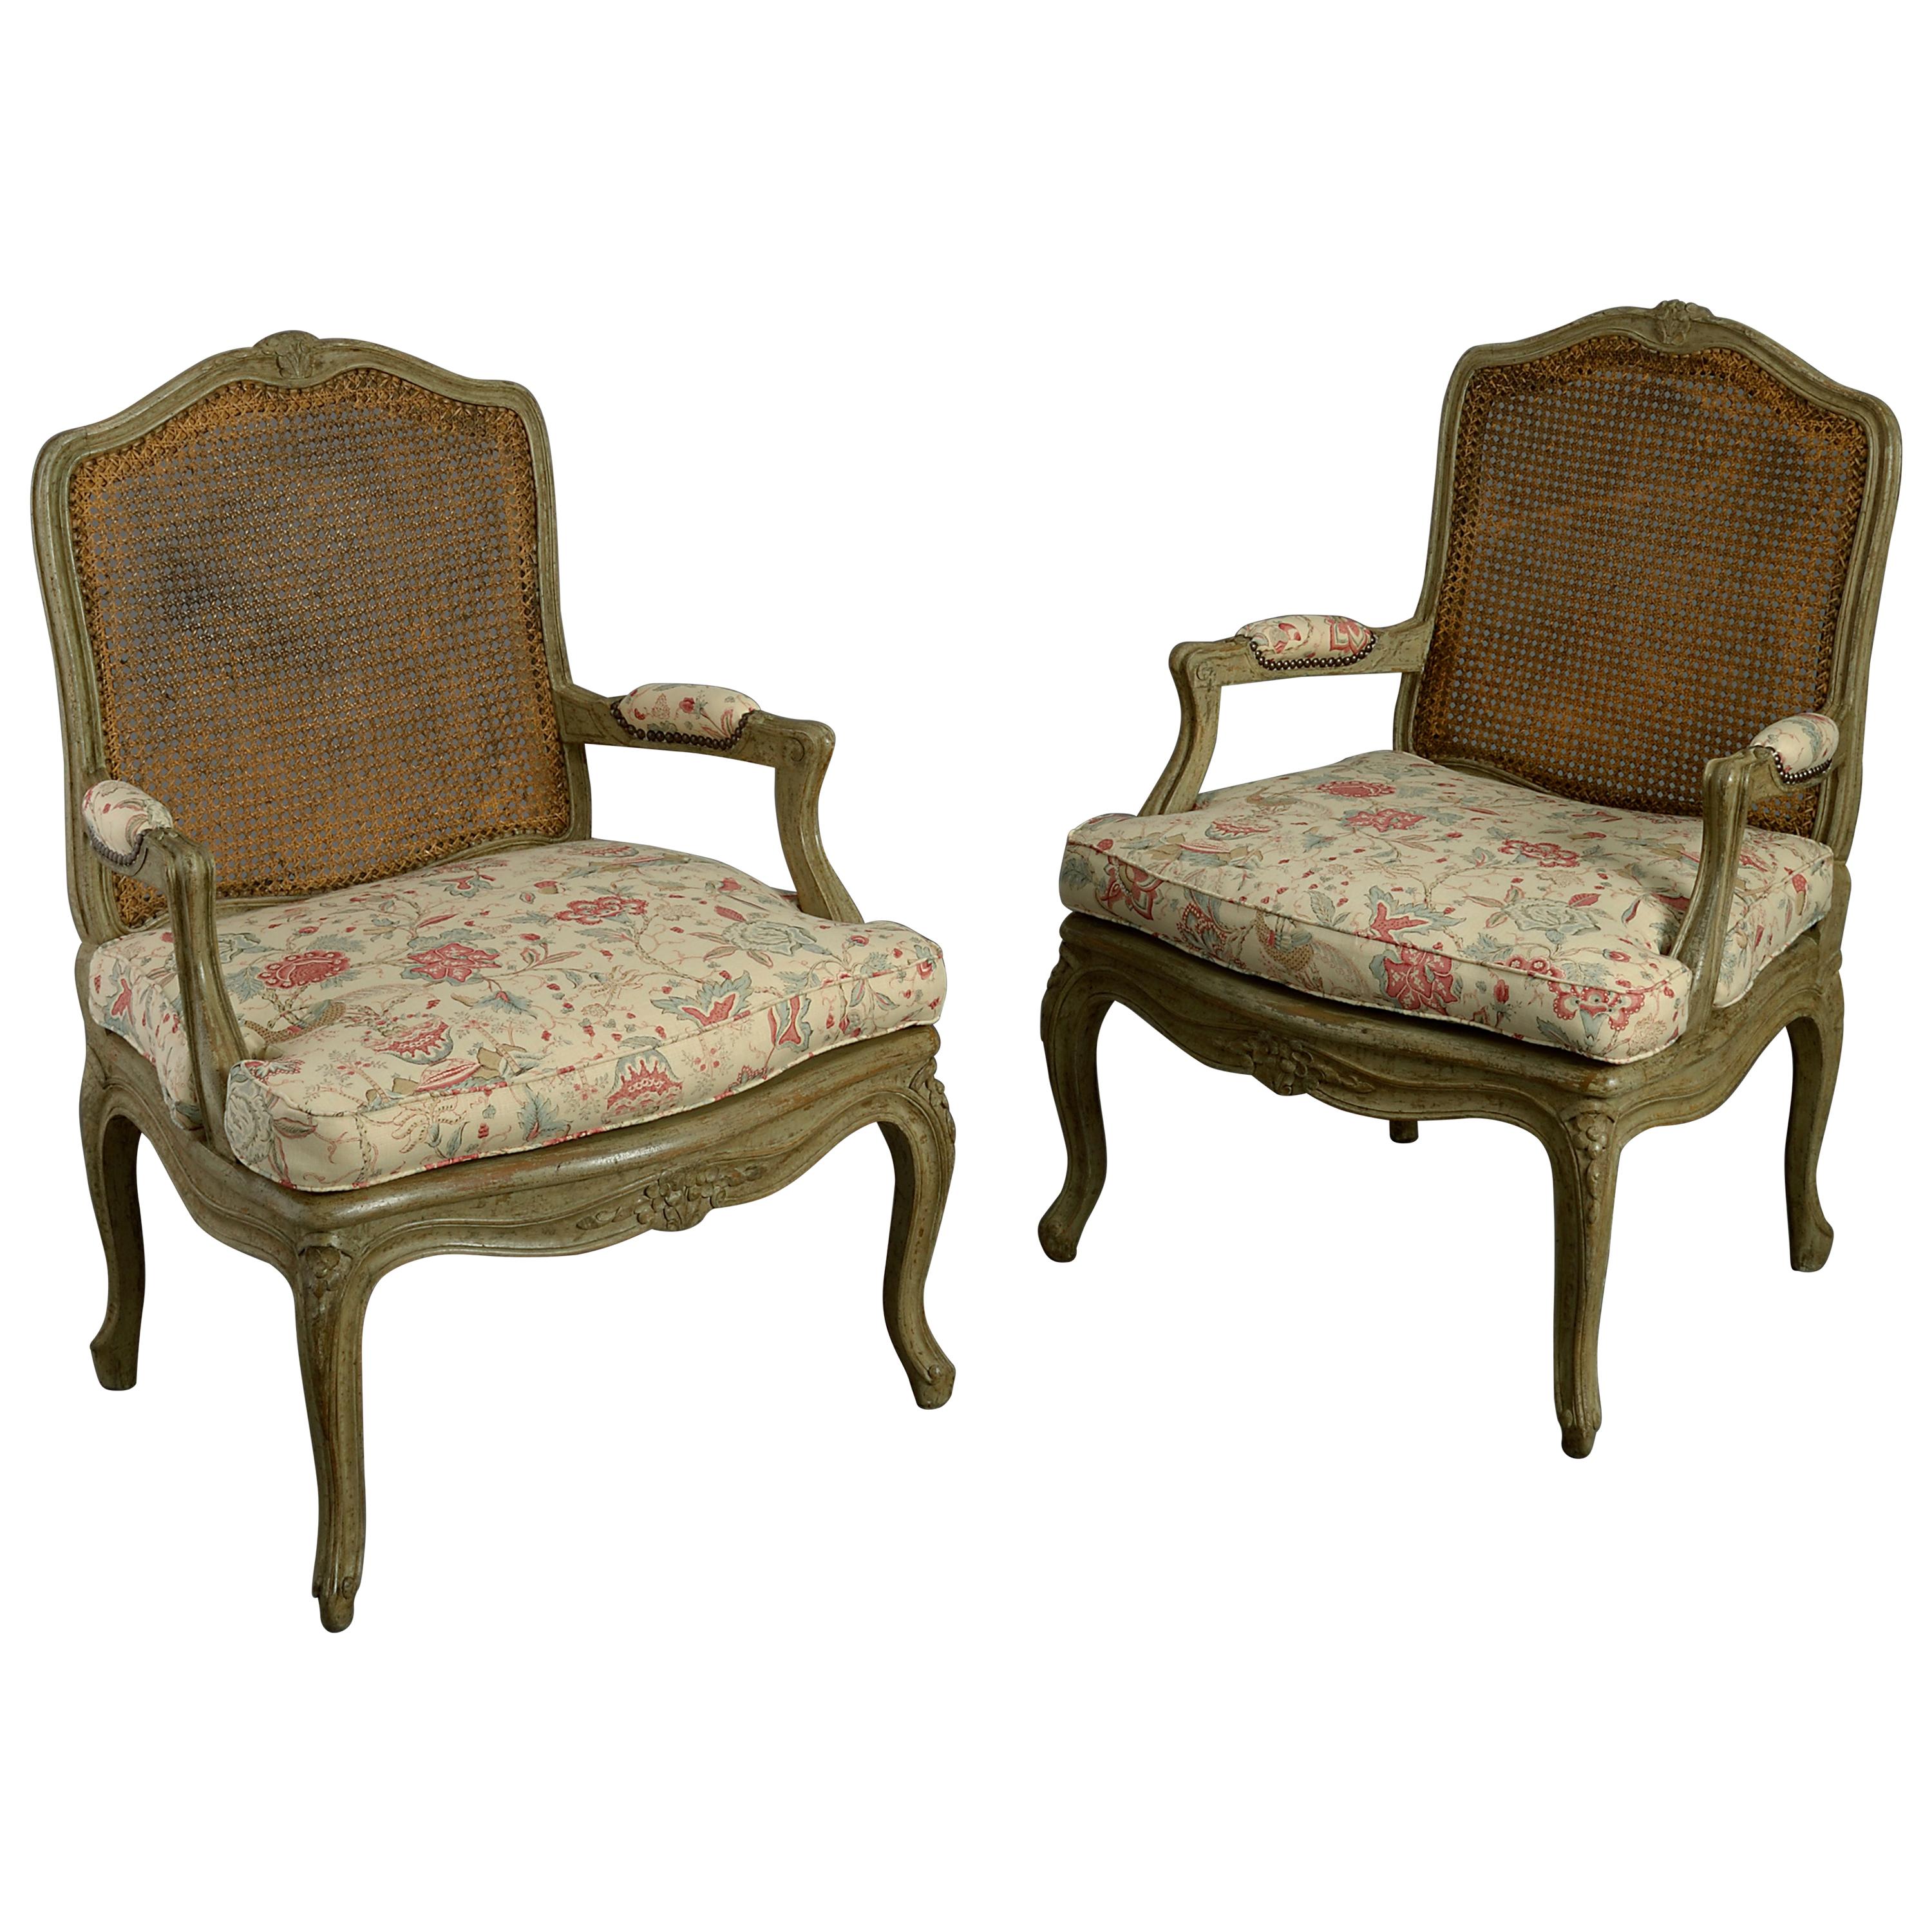 Pair of 18th Century Louis XV Period Painted Rococo Armchairs